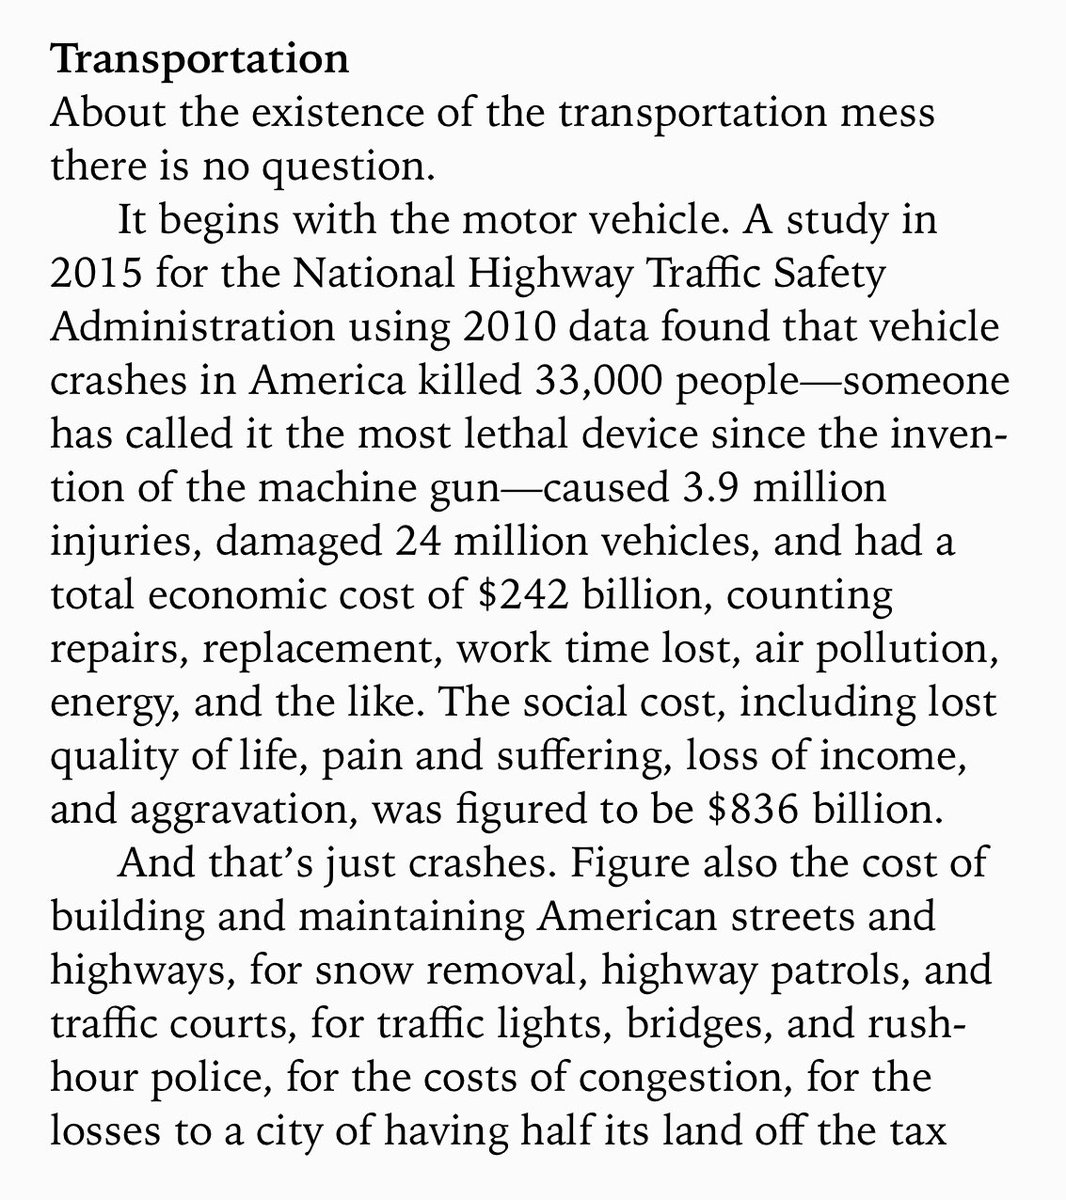 Kirkpatrick Sale on transportation and the American traffic system, which is about as far from the human scale as is possible to imagine today. A subject I often talk about myself.